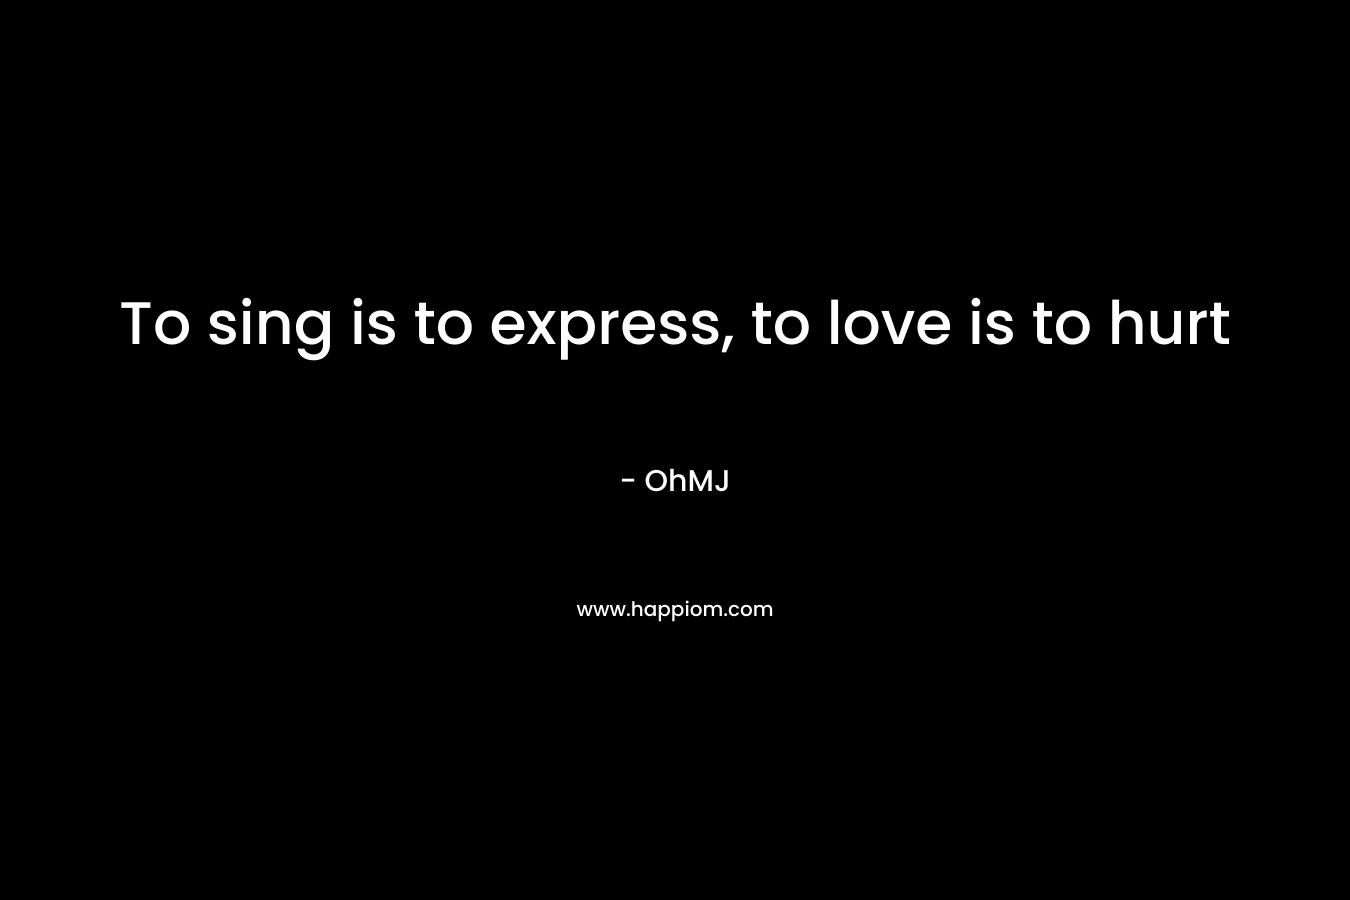 To sing is to express, to love is to hurt – OhMJ